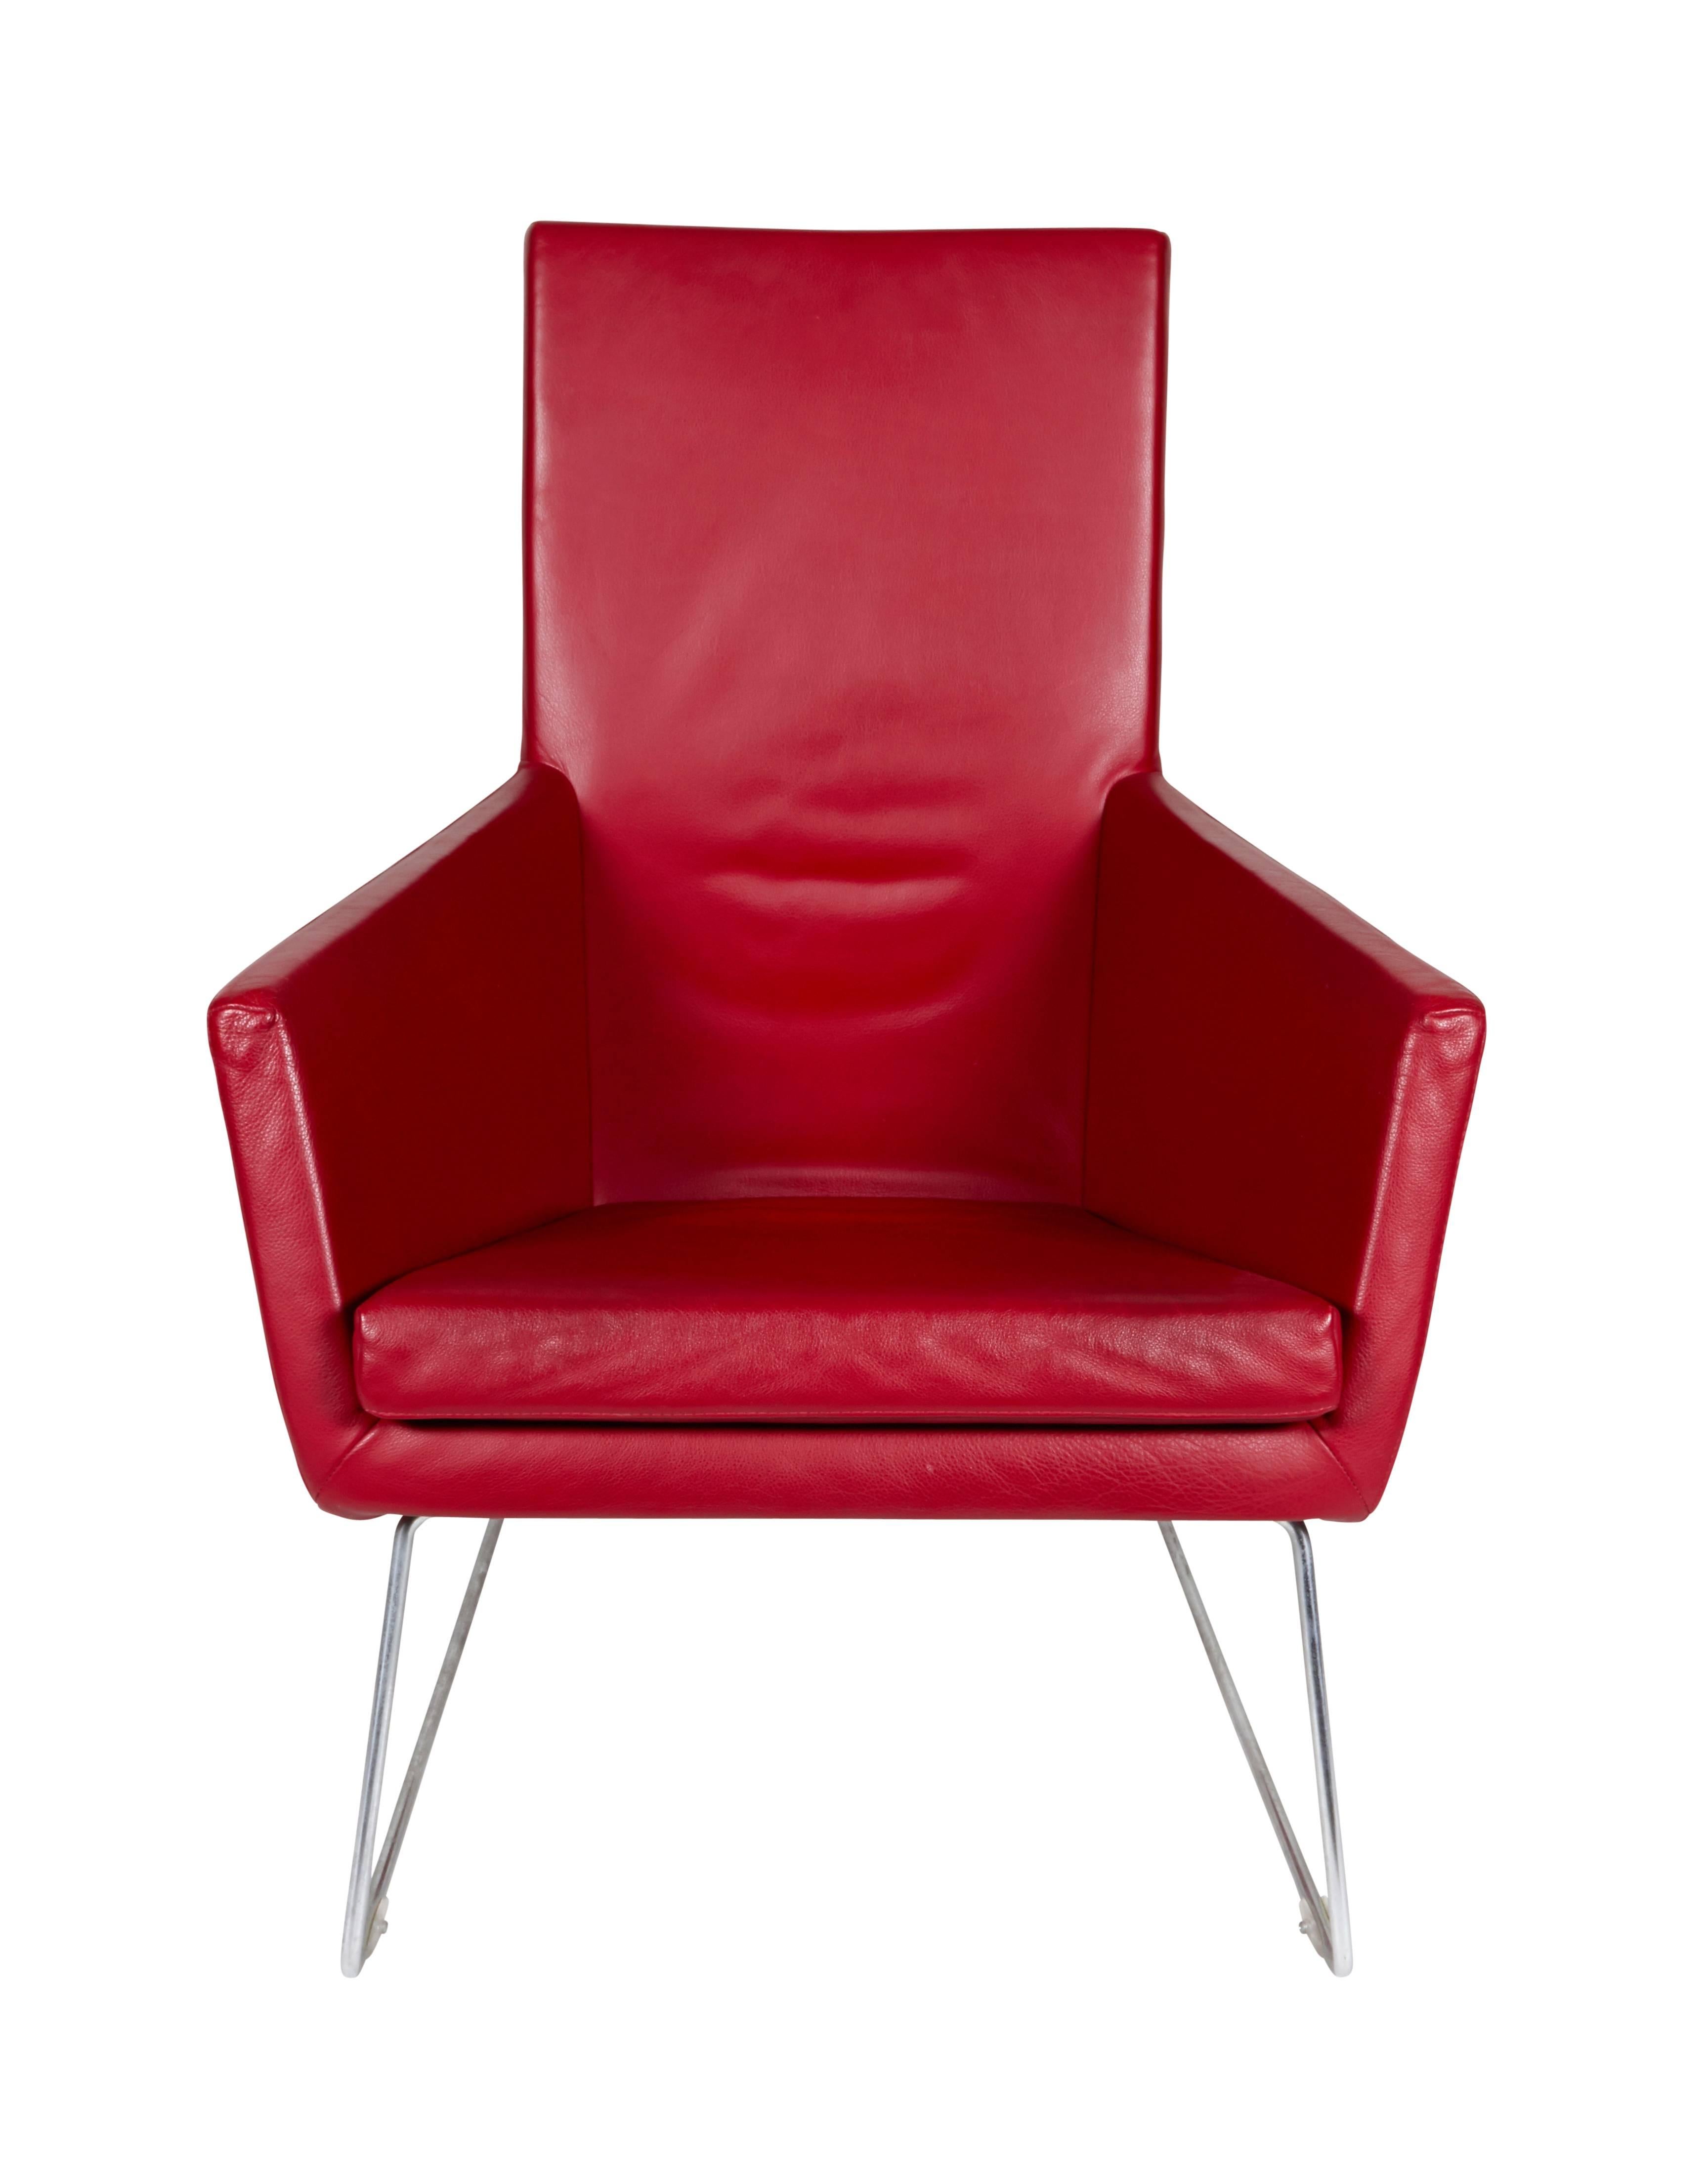 Designed for beauty and comfort this chair makes a striking statement.